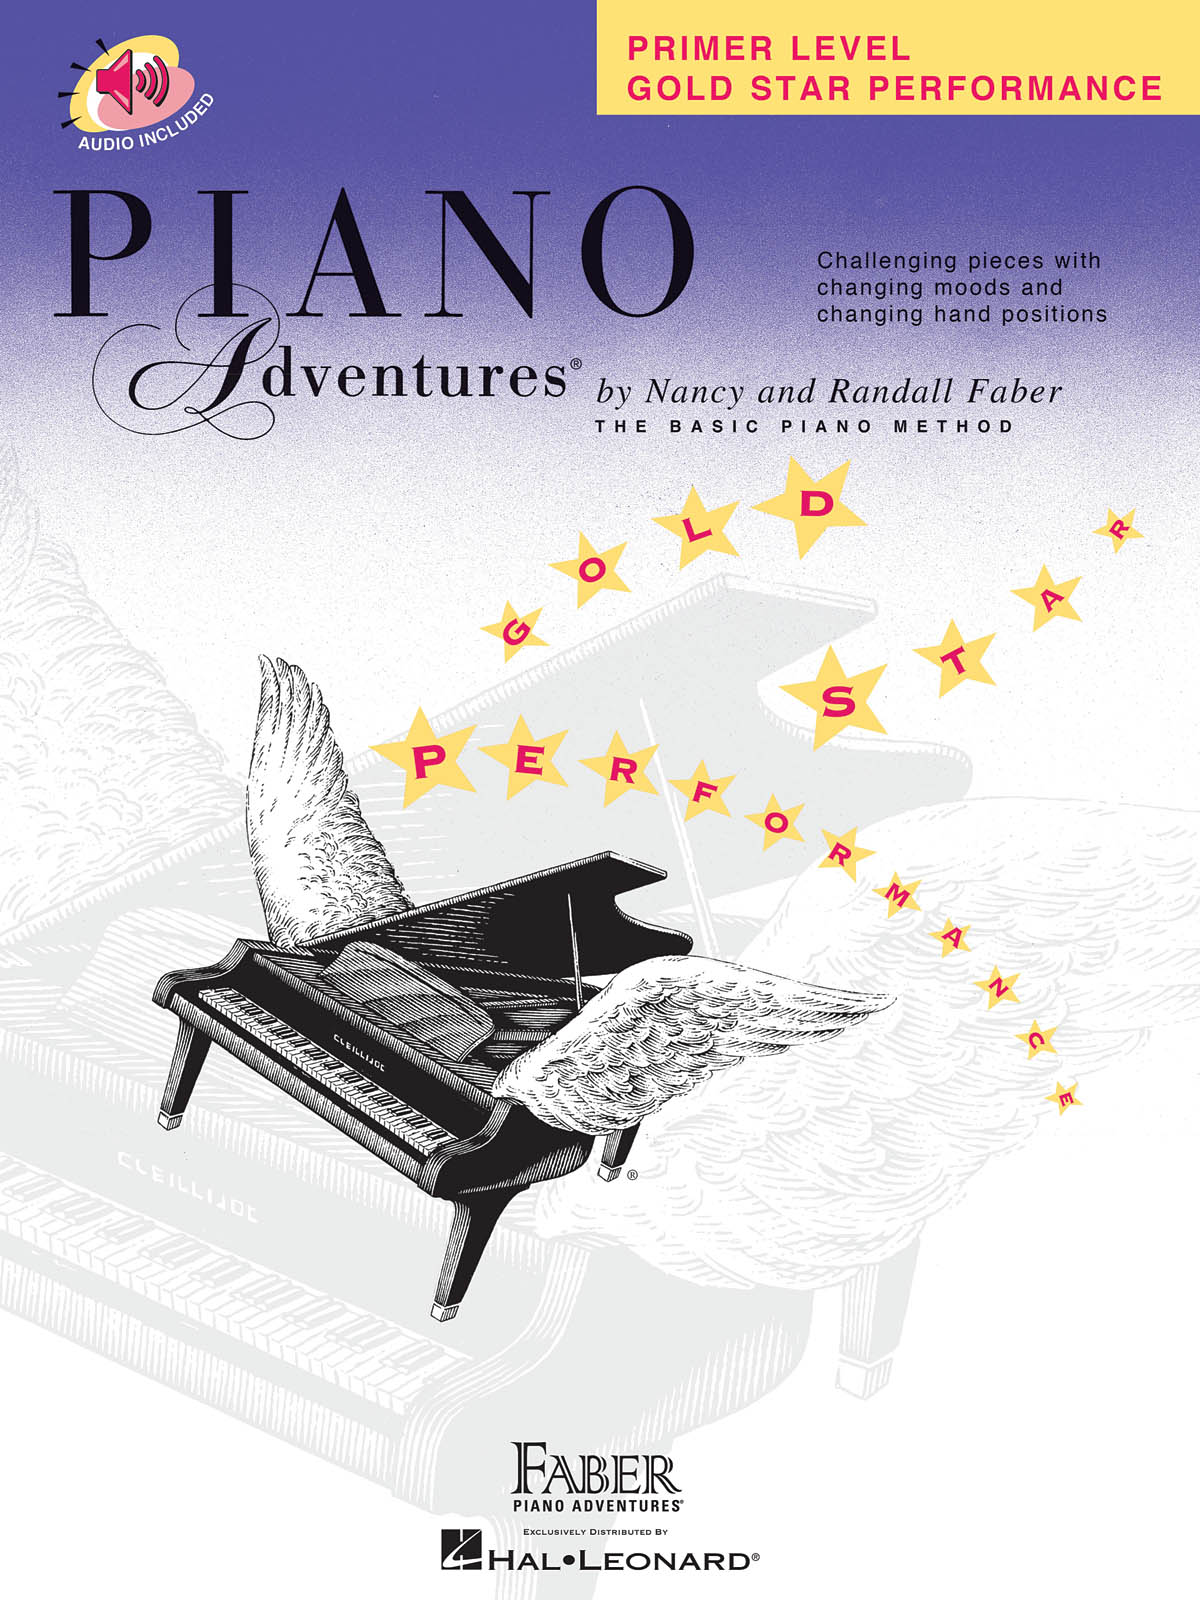 Faber Piano Adventures: Primer Level Gold Star Performance